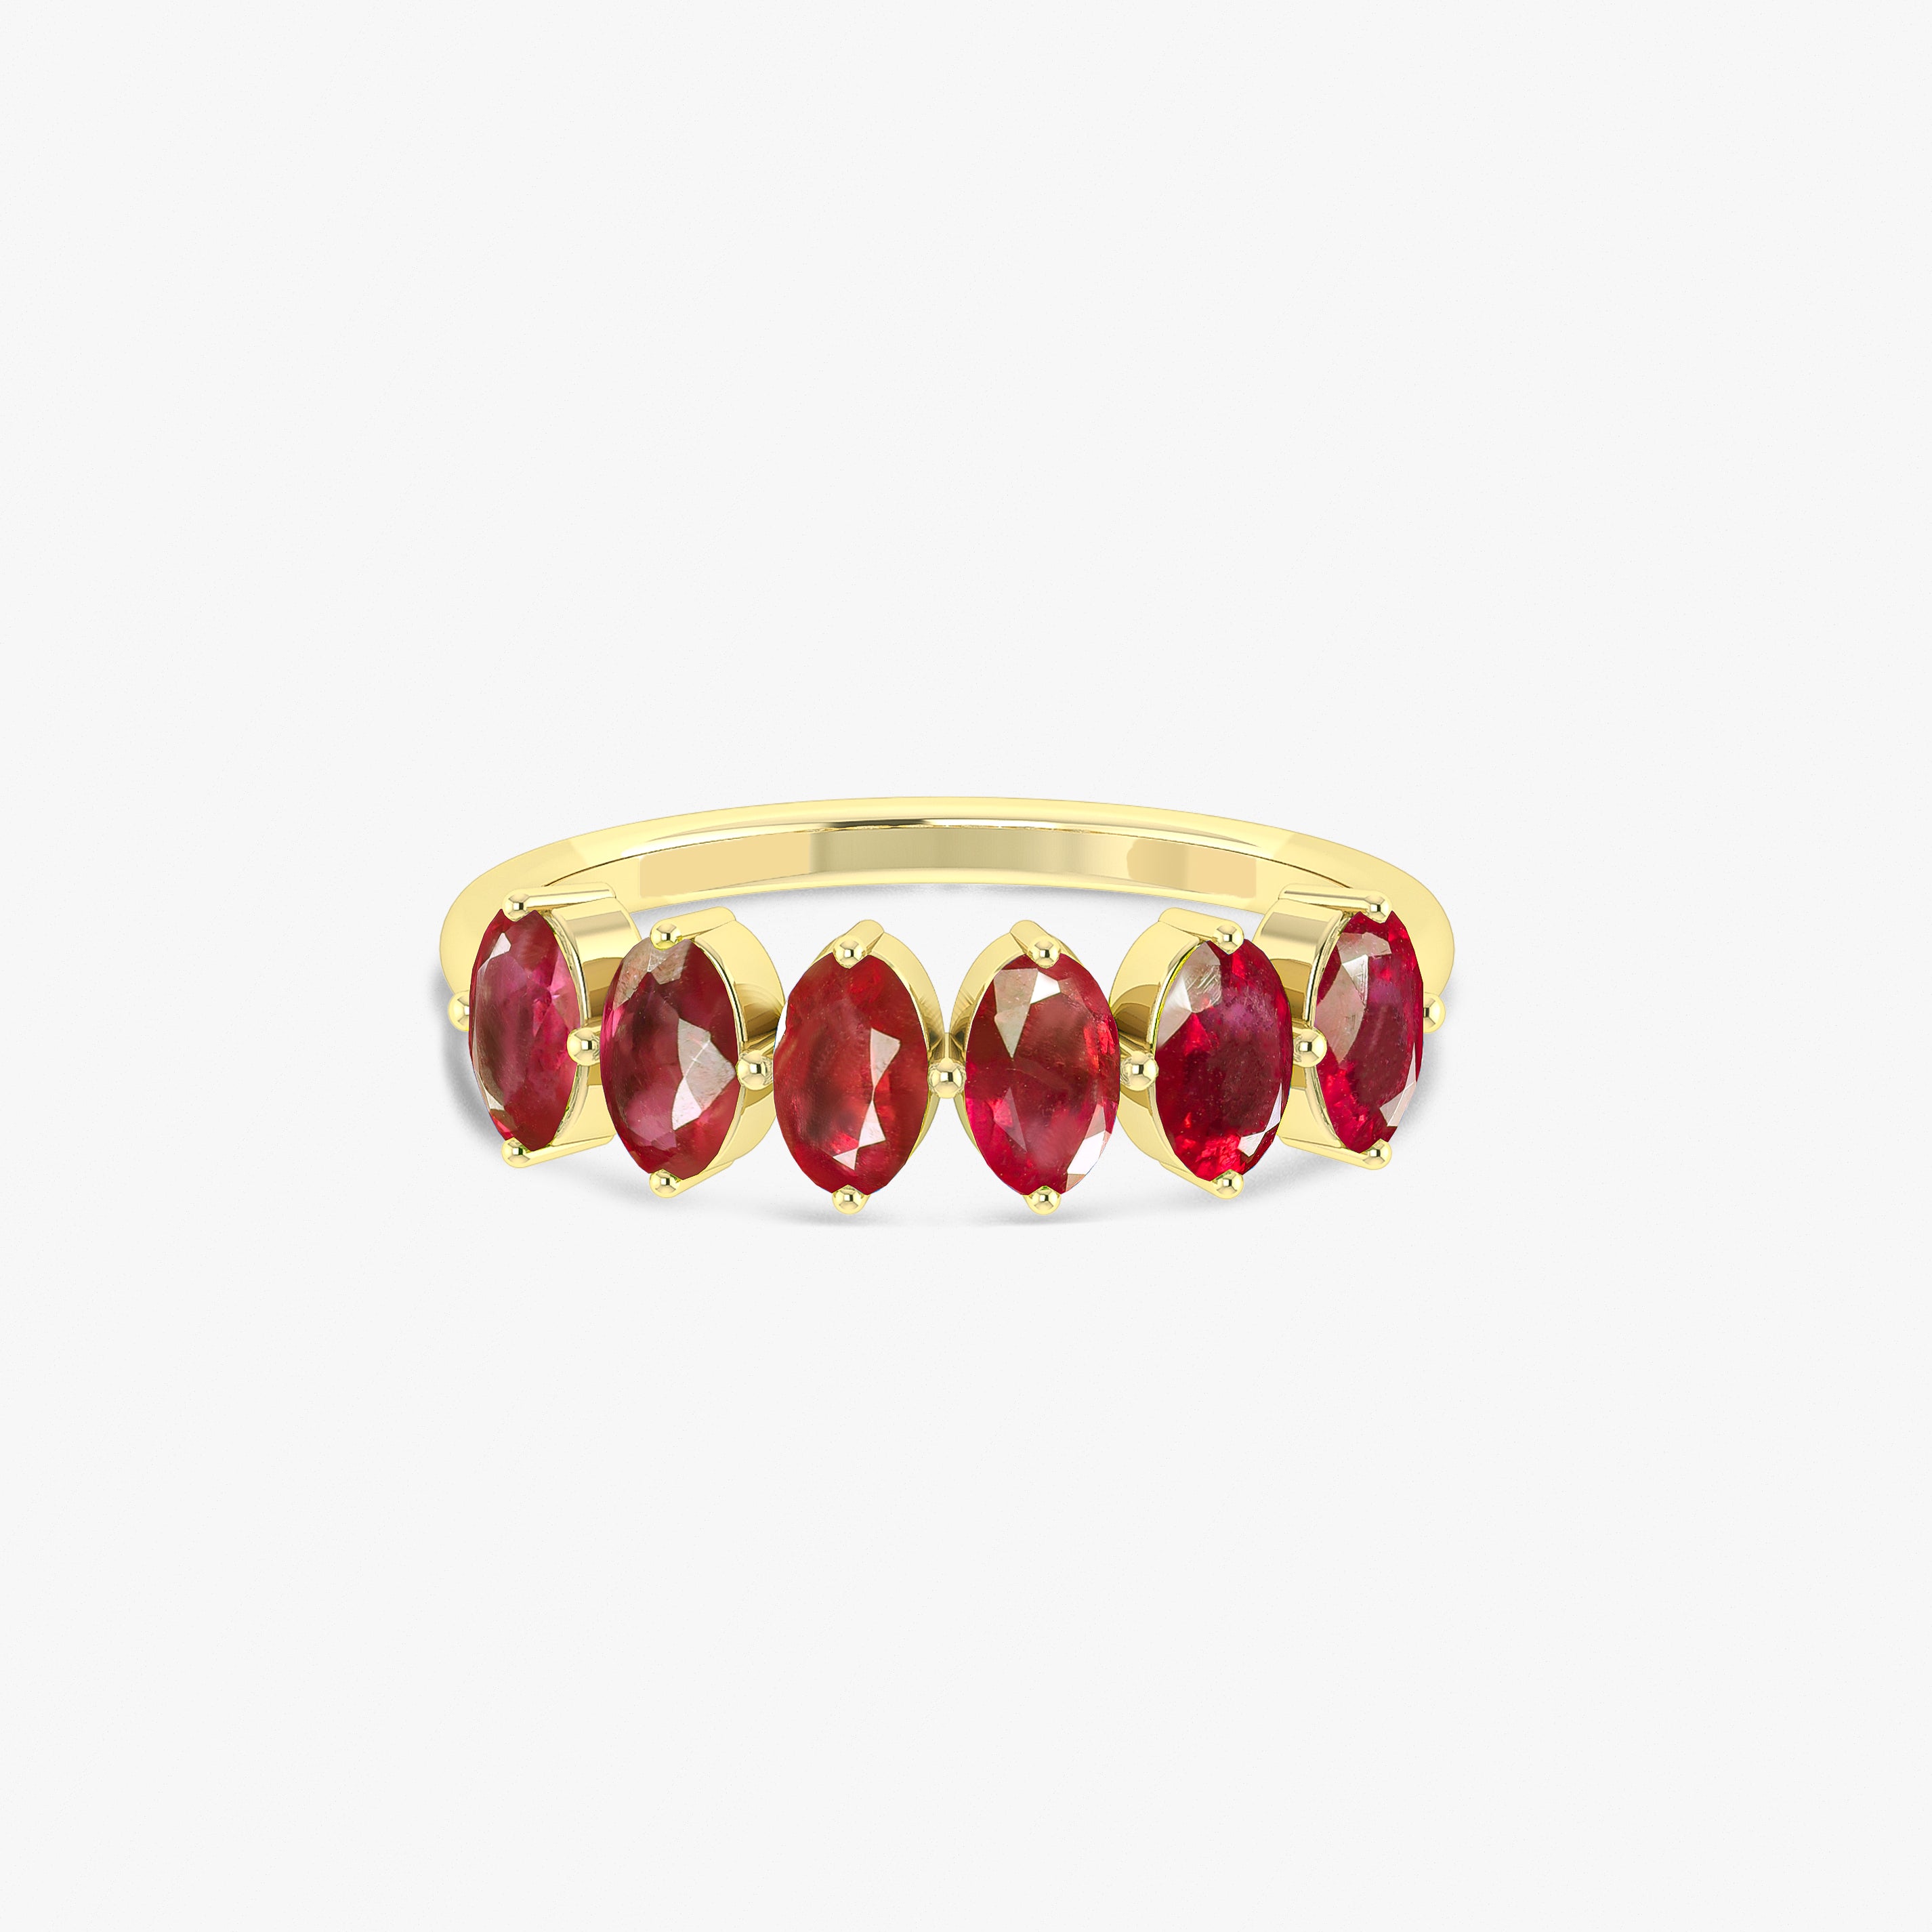 Red Oval Shape Ruby Gemstone Ring